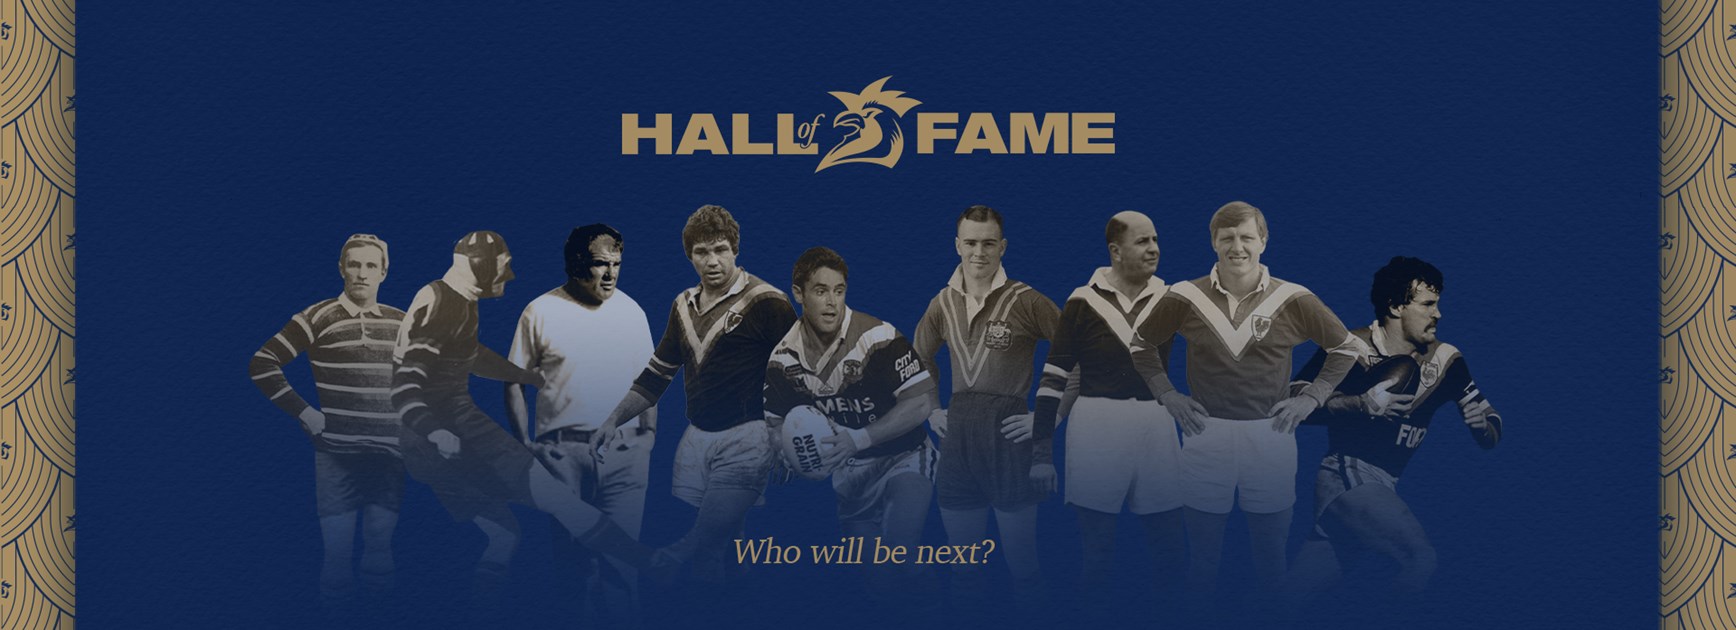 Second Round Hall of Fame Seating Now Available